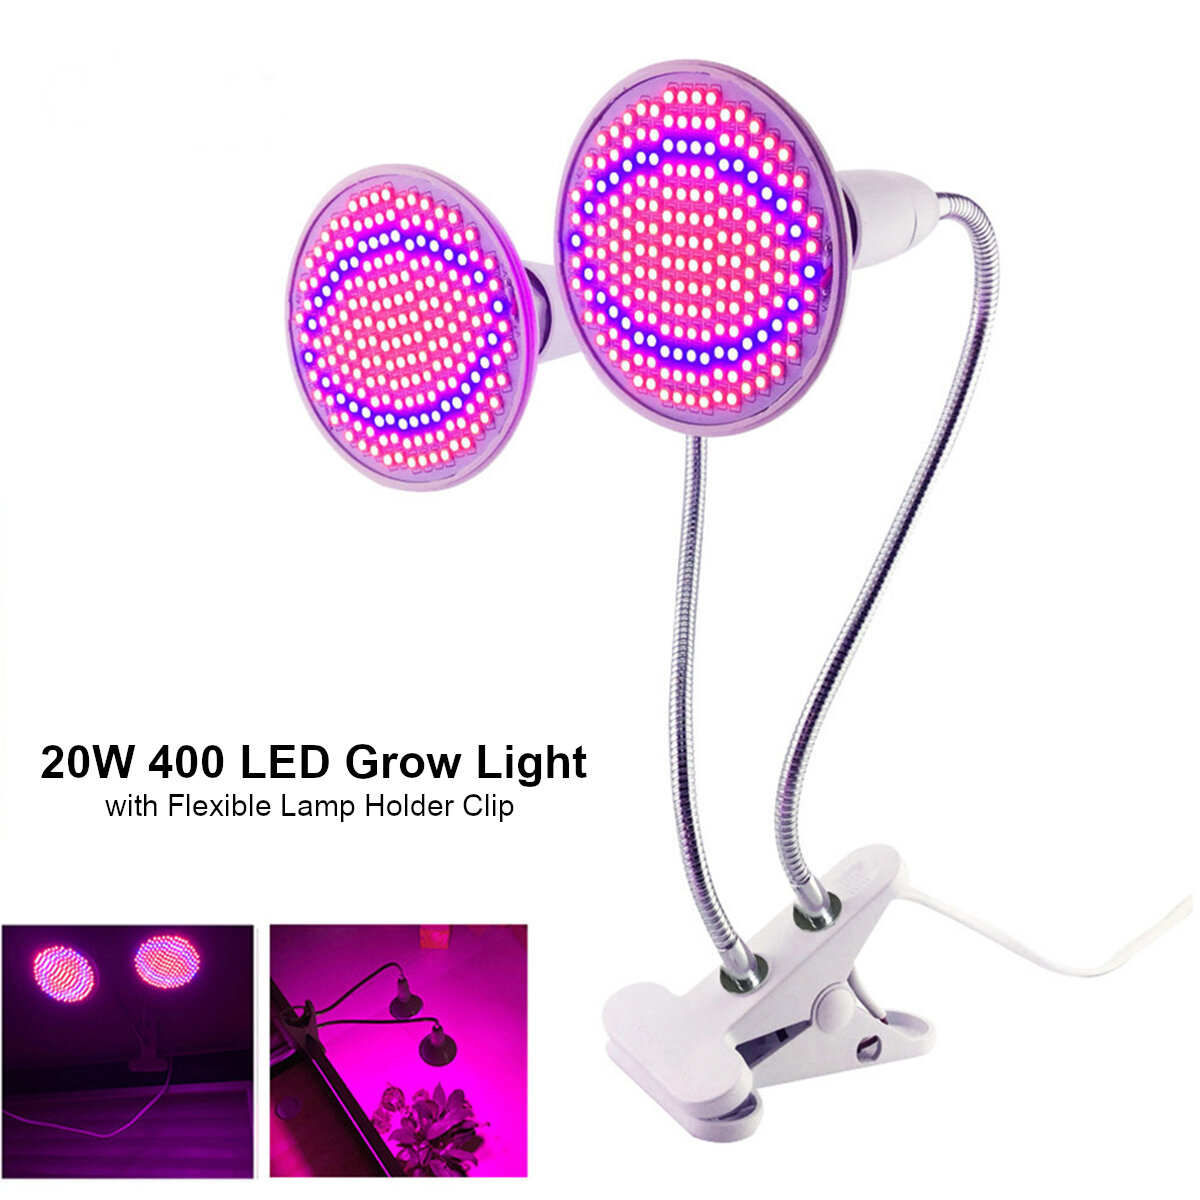 Dual Heads 20W LED Plant Grow Light with Lamp Holder Clip For Home Indoor Vegetable Flowers AC85-265V